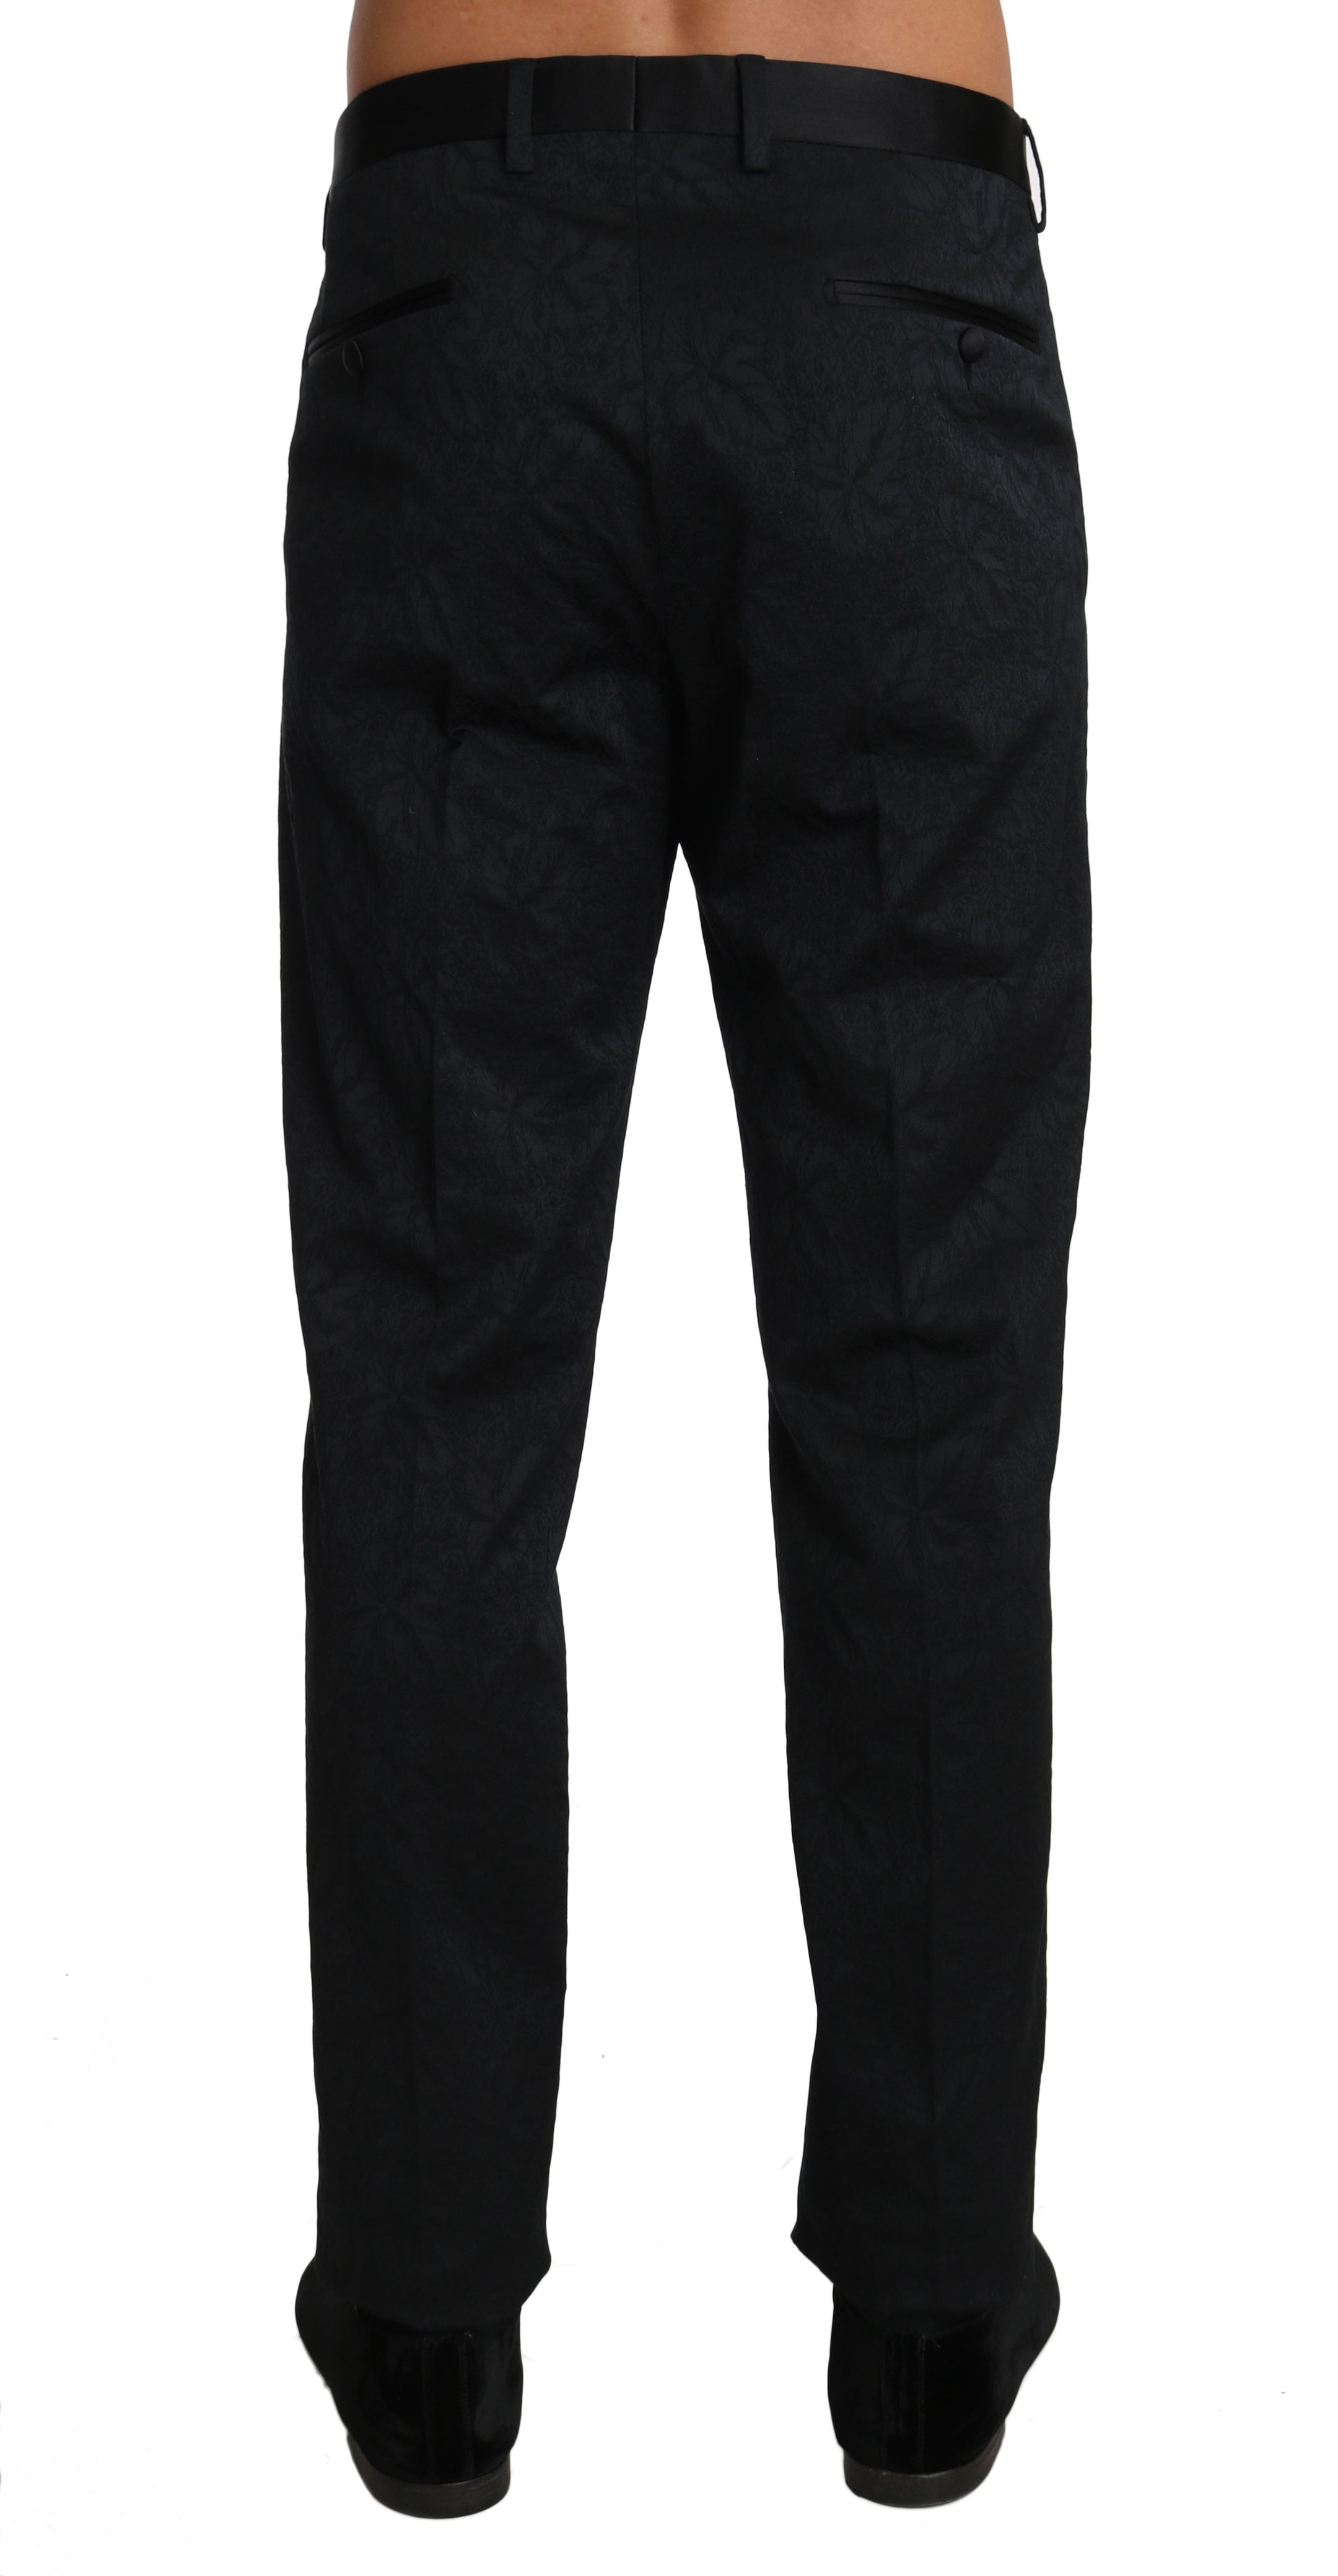 Buy Black Cotton Brocade Formal Trousers Pants by Dolce & Gabbana